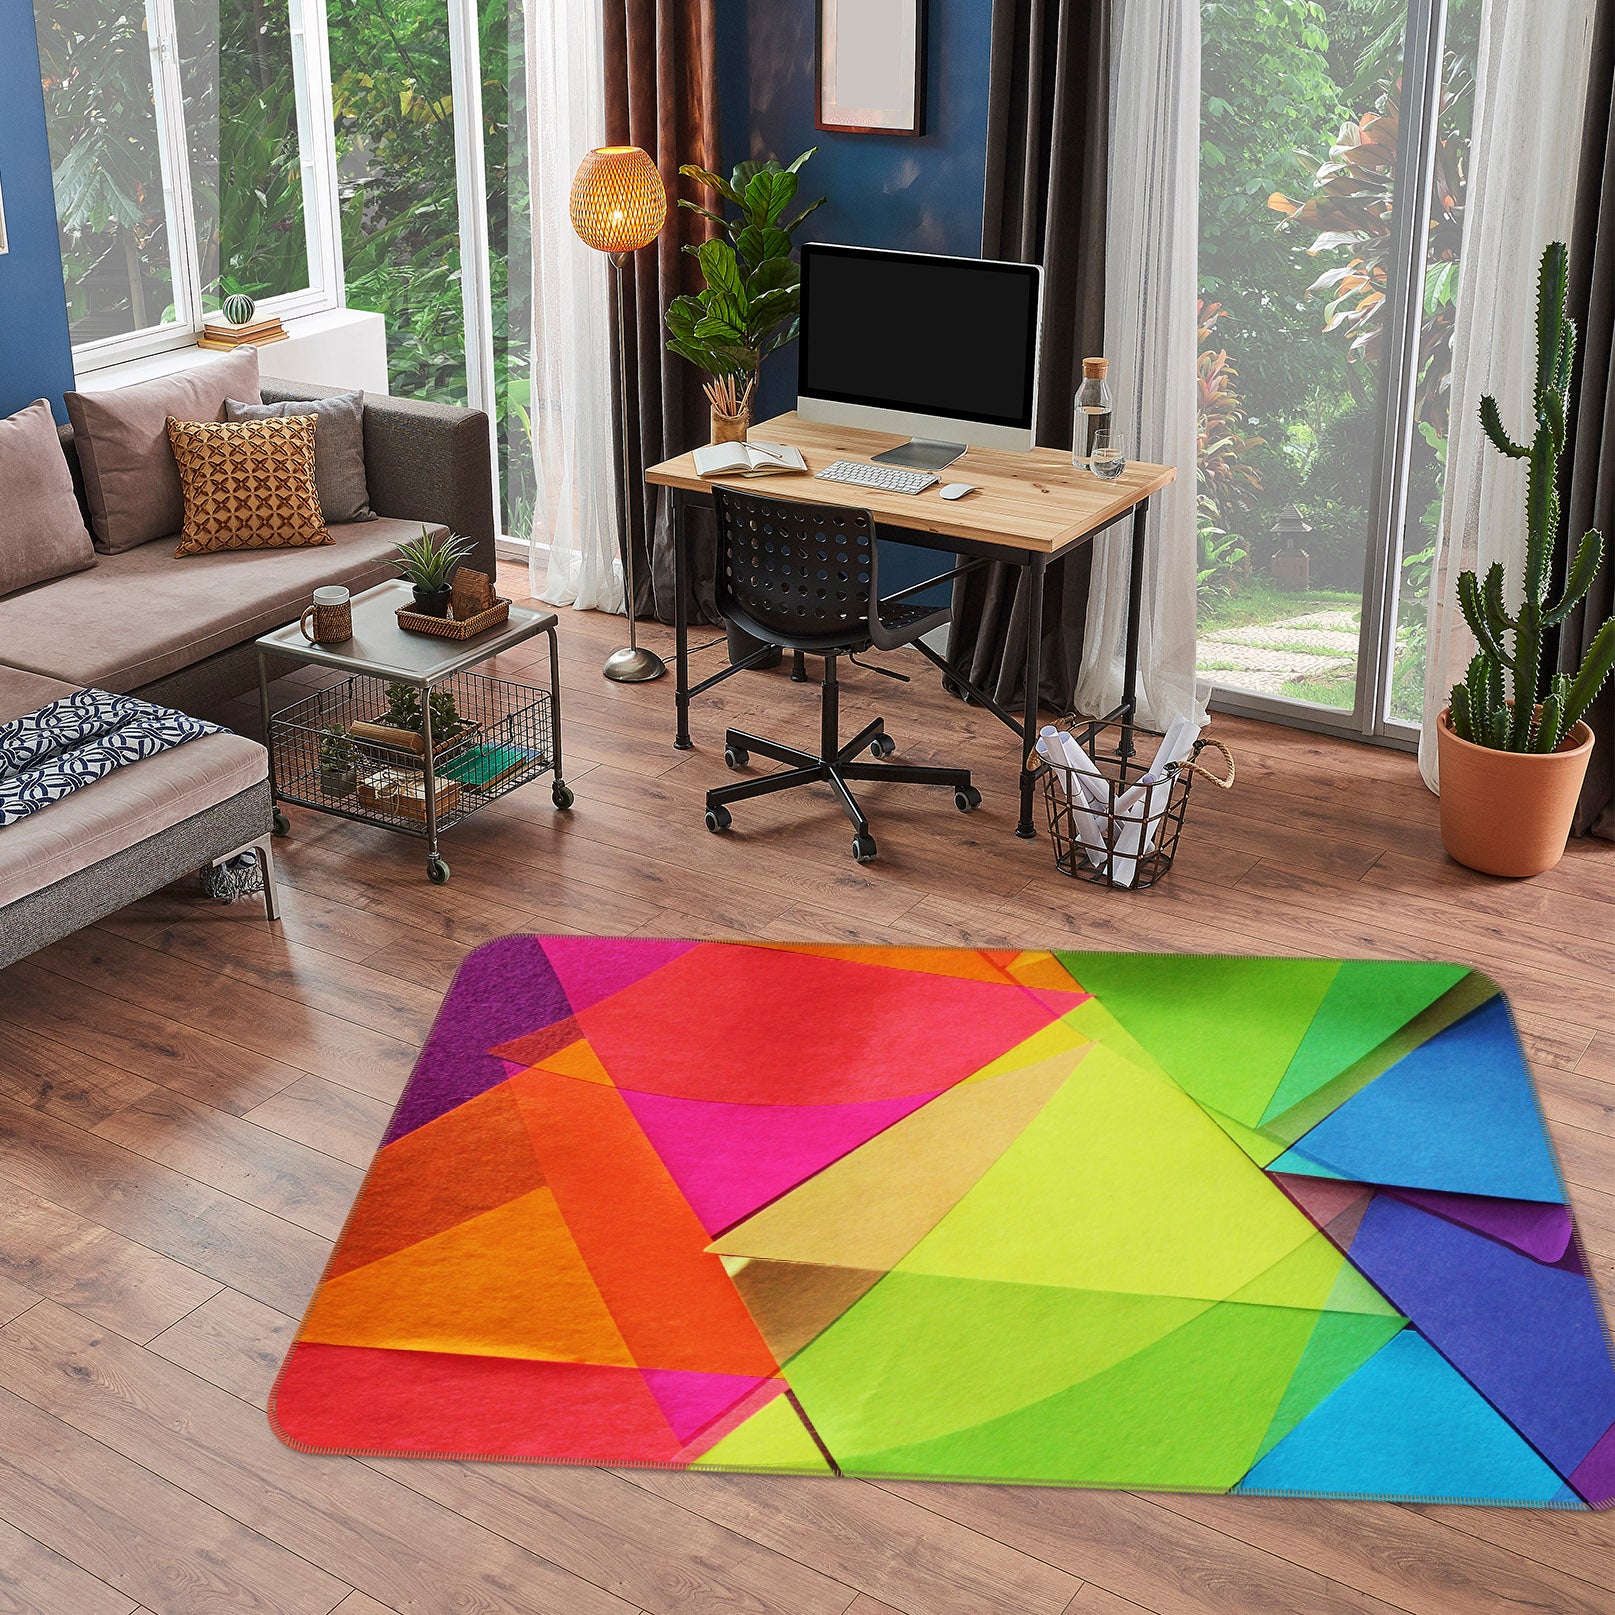 3D Colored Triangle 70057 Shandra Smith Rug Non Slip Rug Mat